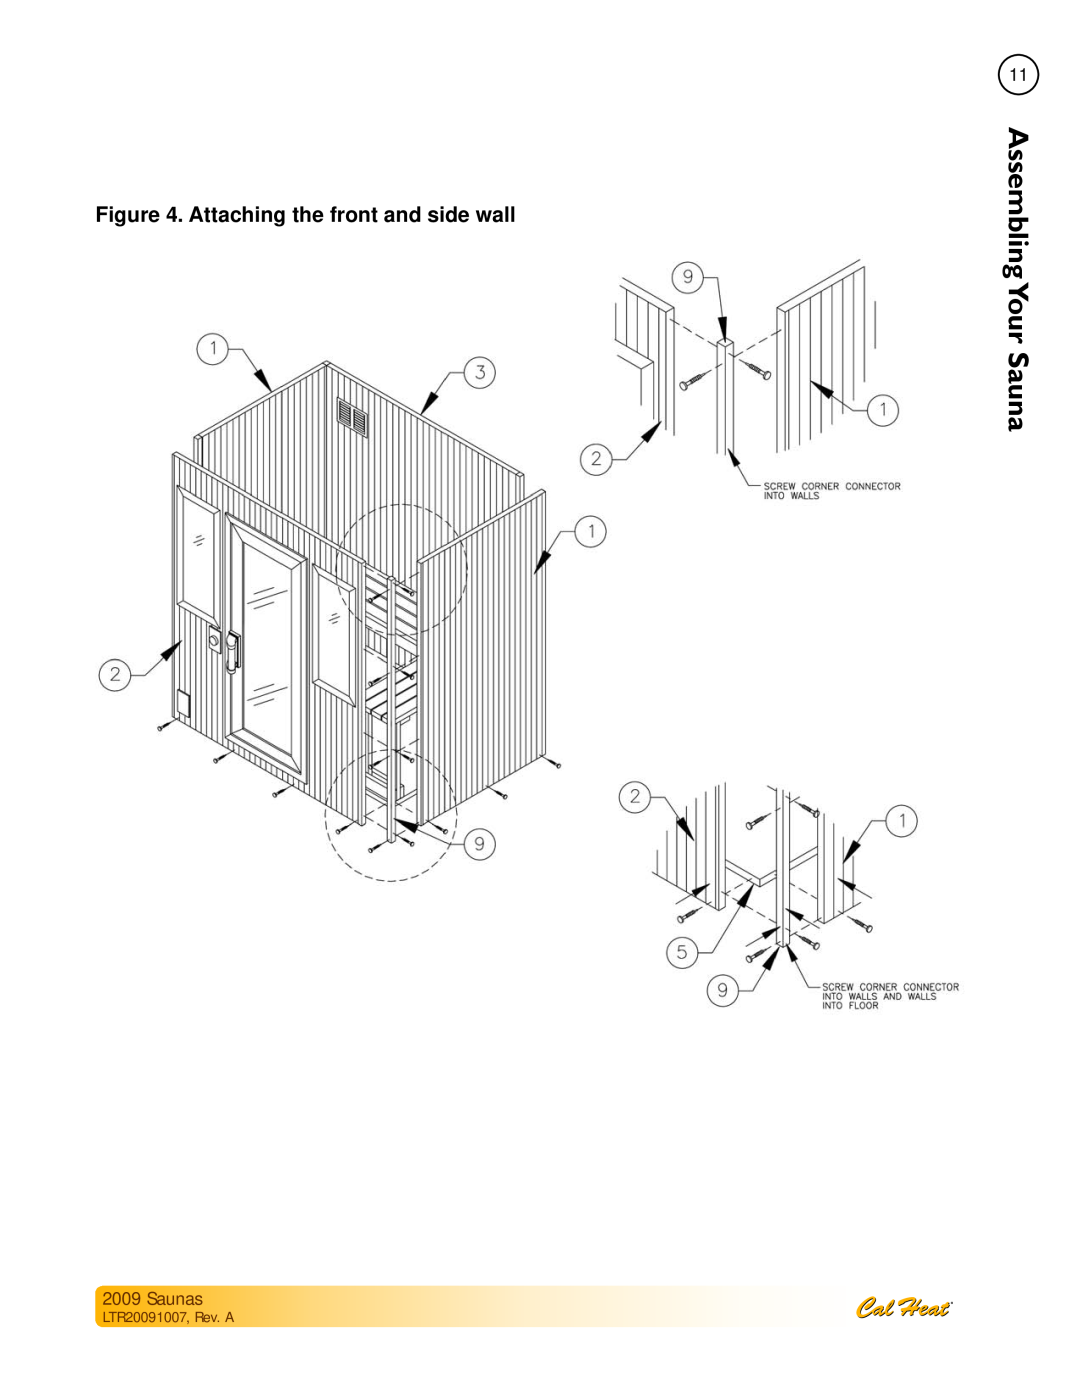 Cal Spas Saunas manual Attaching the front and side wall, LTR20091007, Rev. A, AssemblingYour 